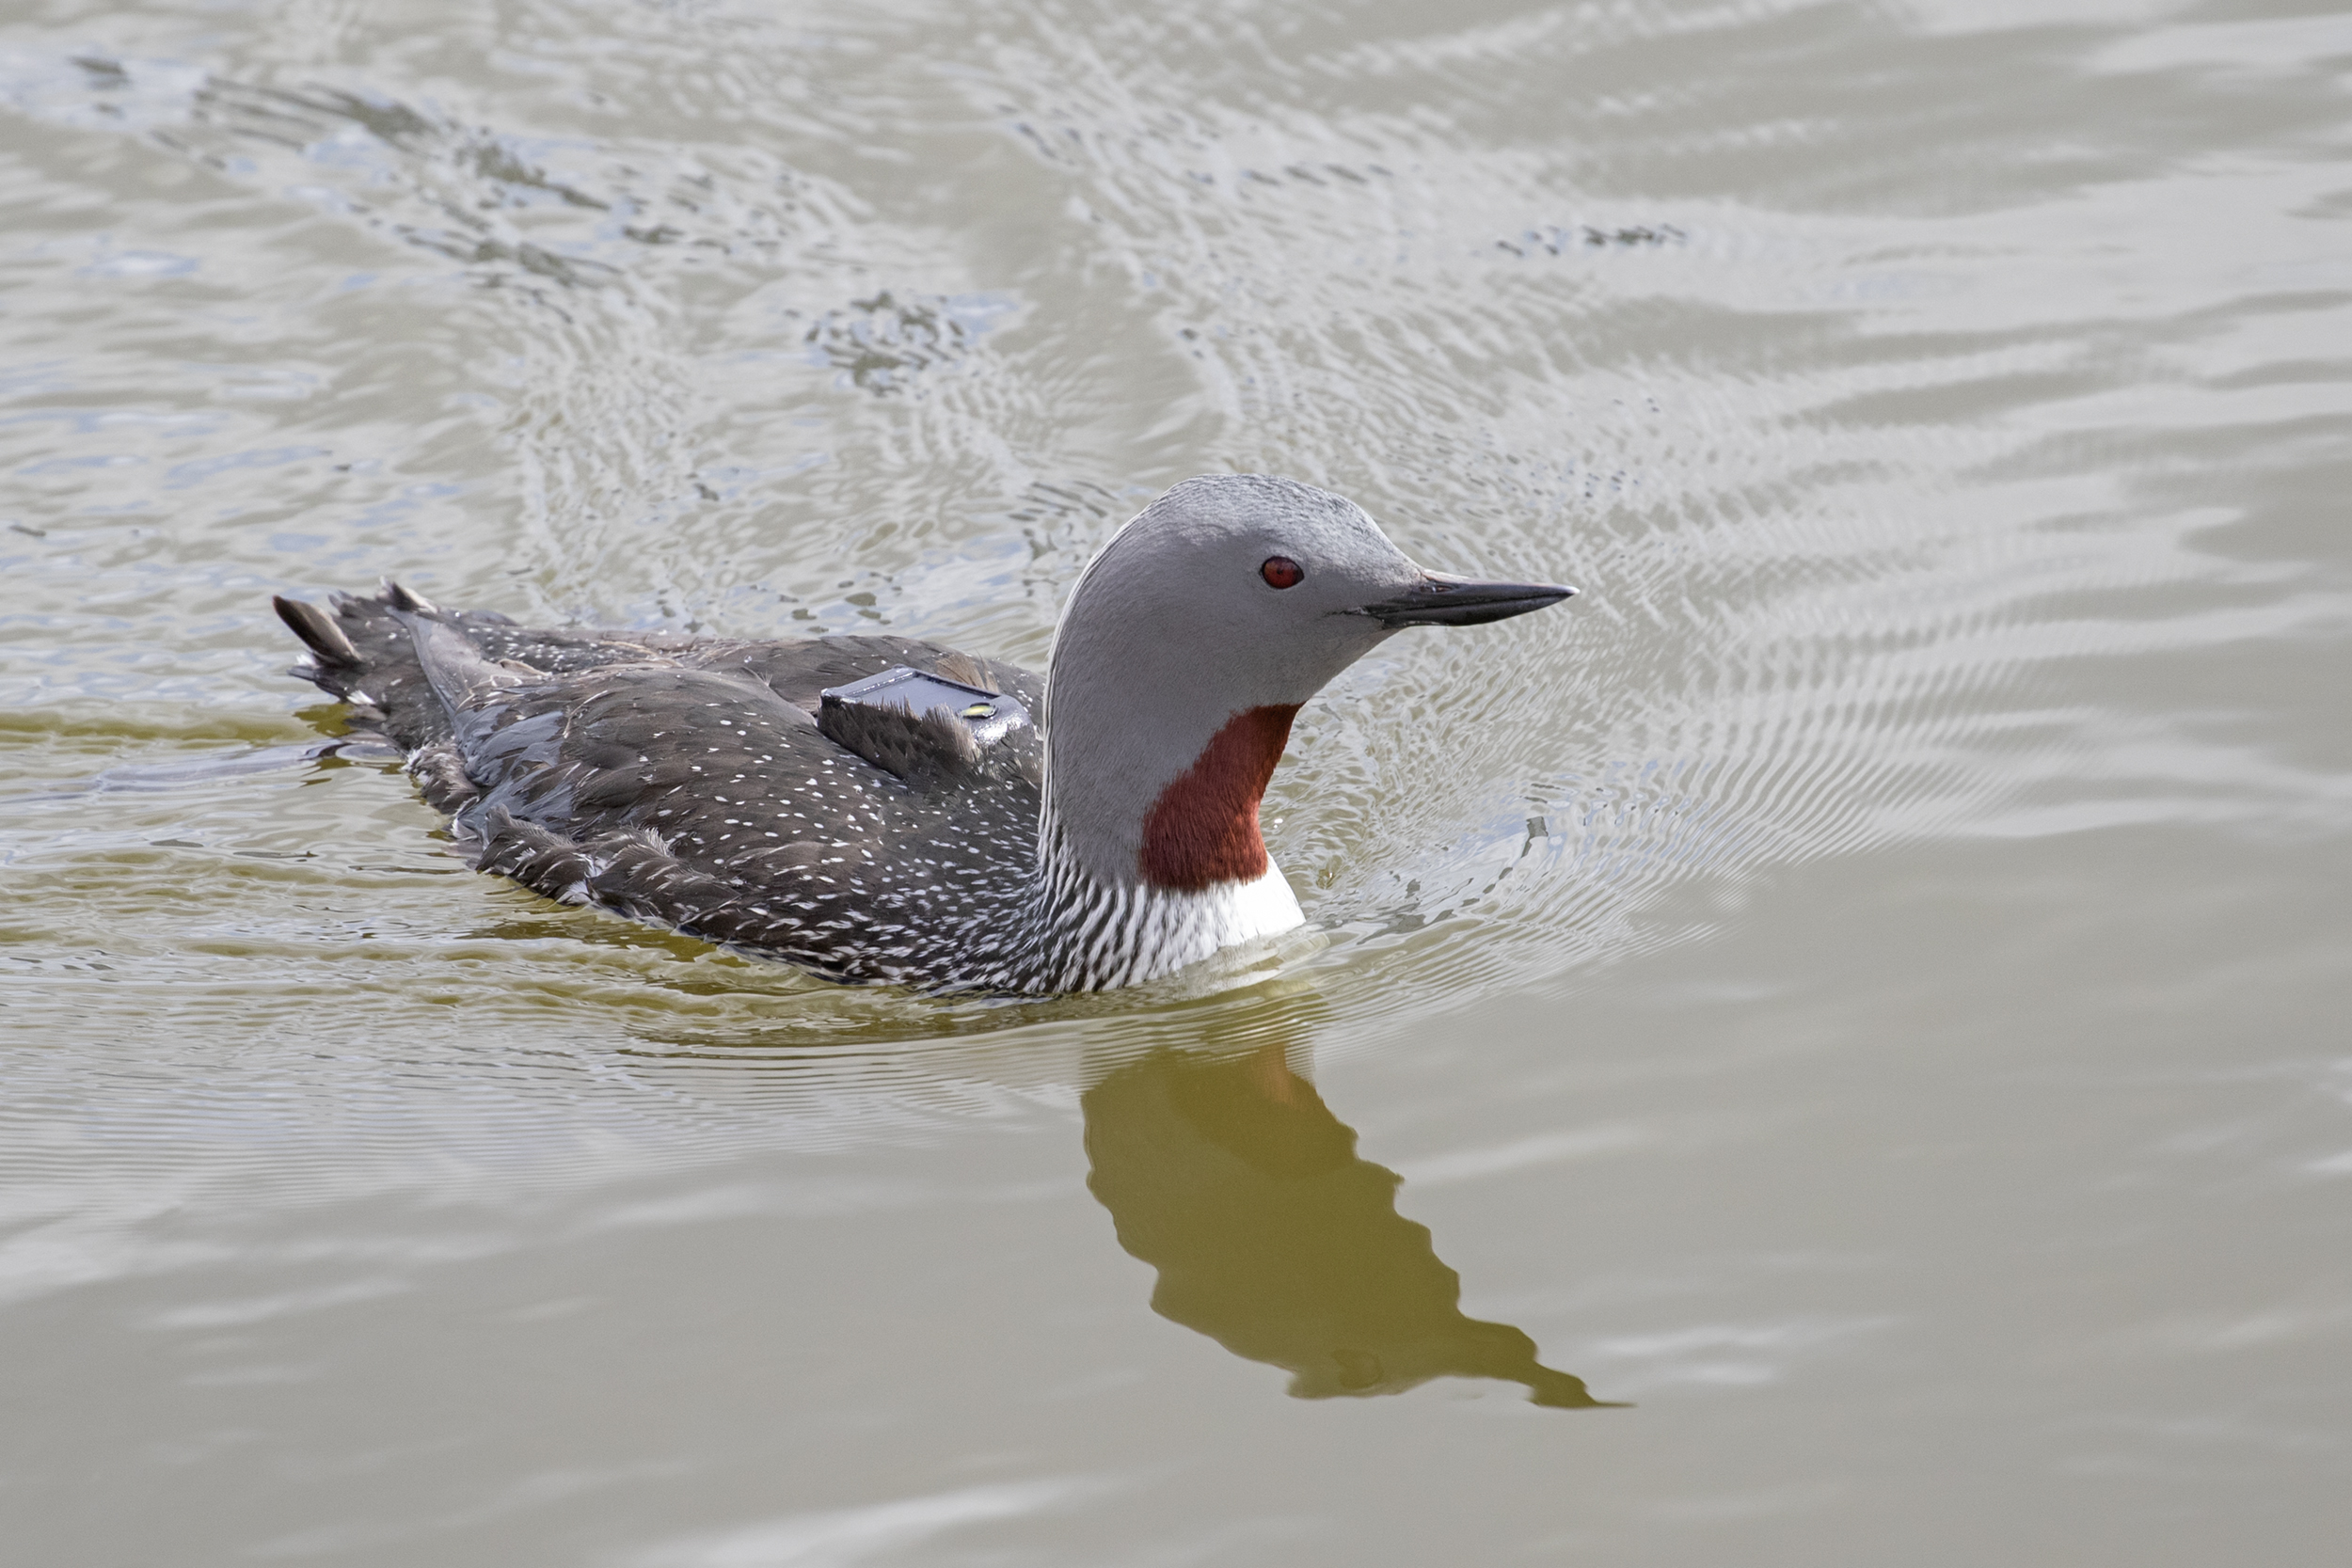 A red-throated diver in breeding plumage with a GPS-GSM device on its back swims on the water.